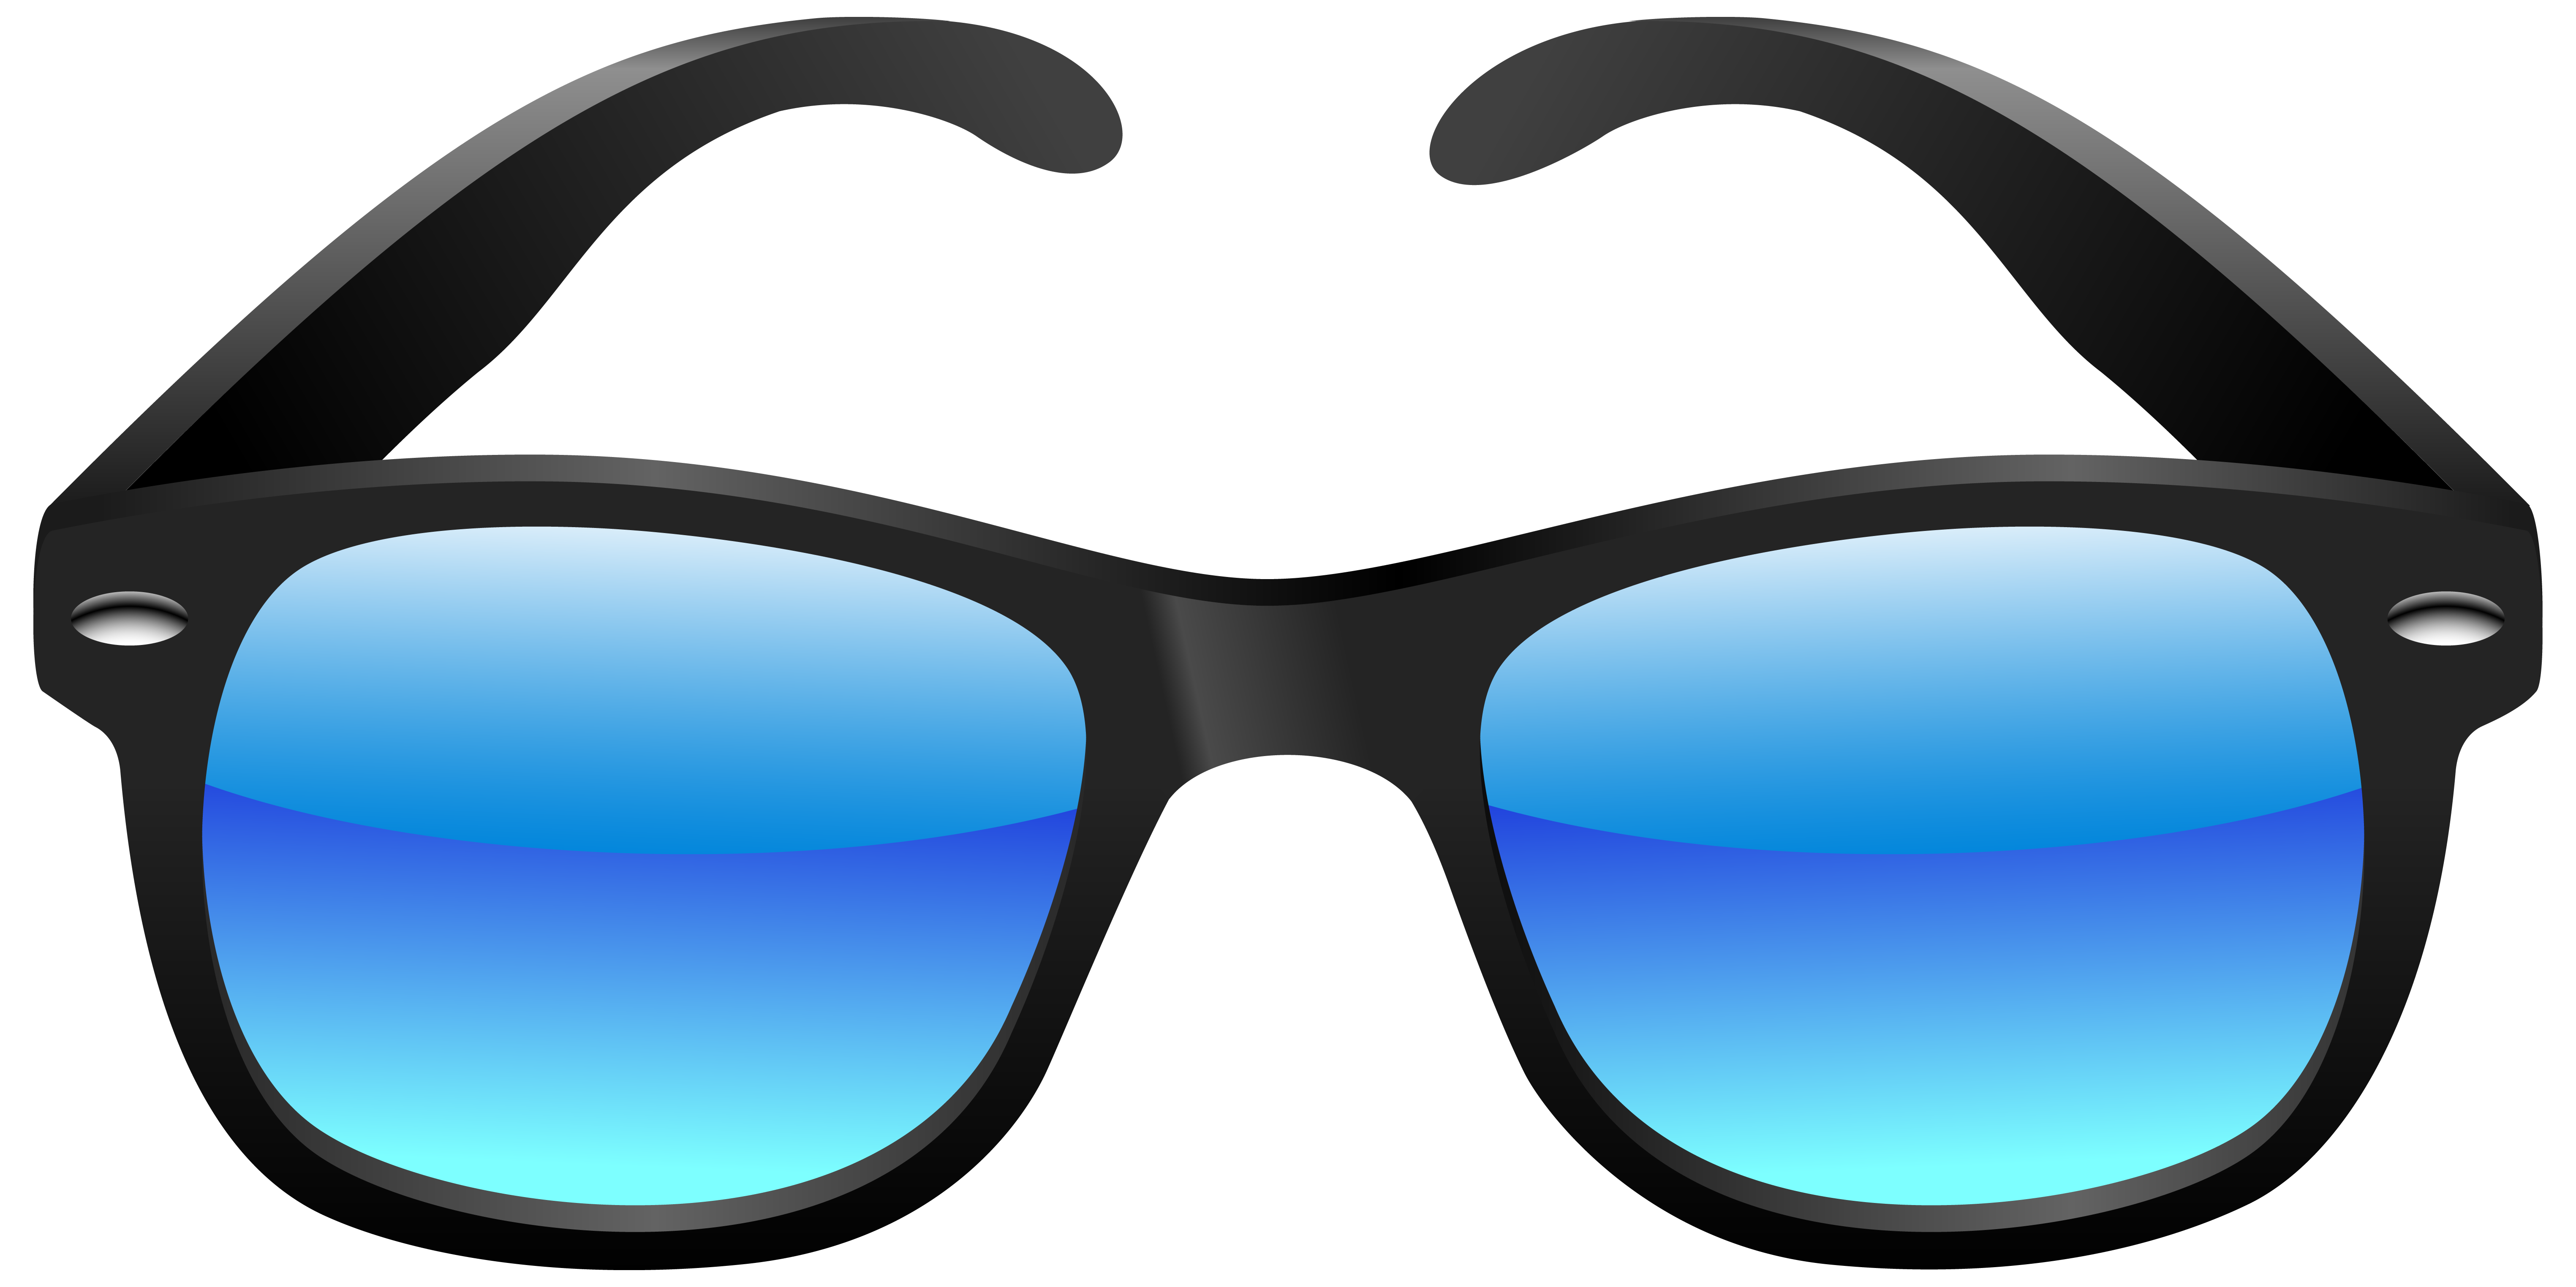 Sunglasses clip art free vector for free Sunglass Clipart about free